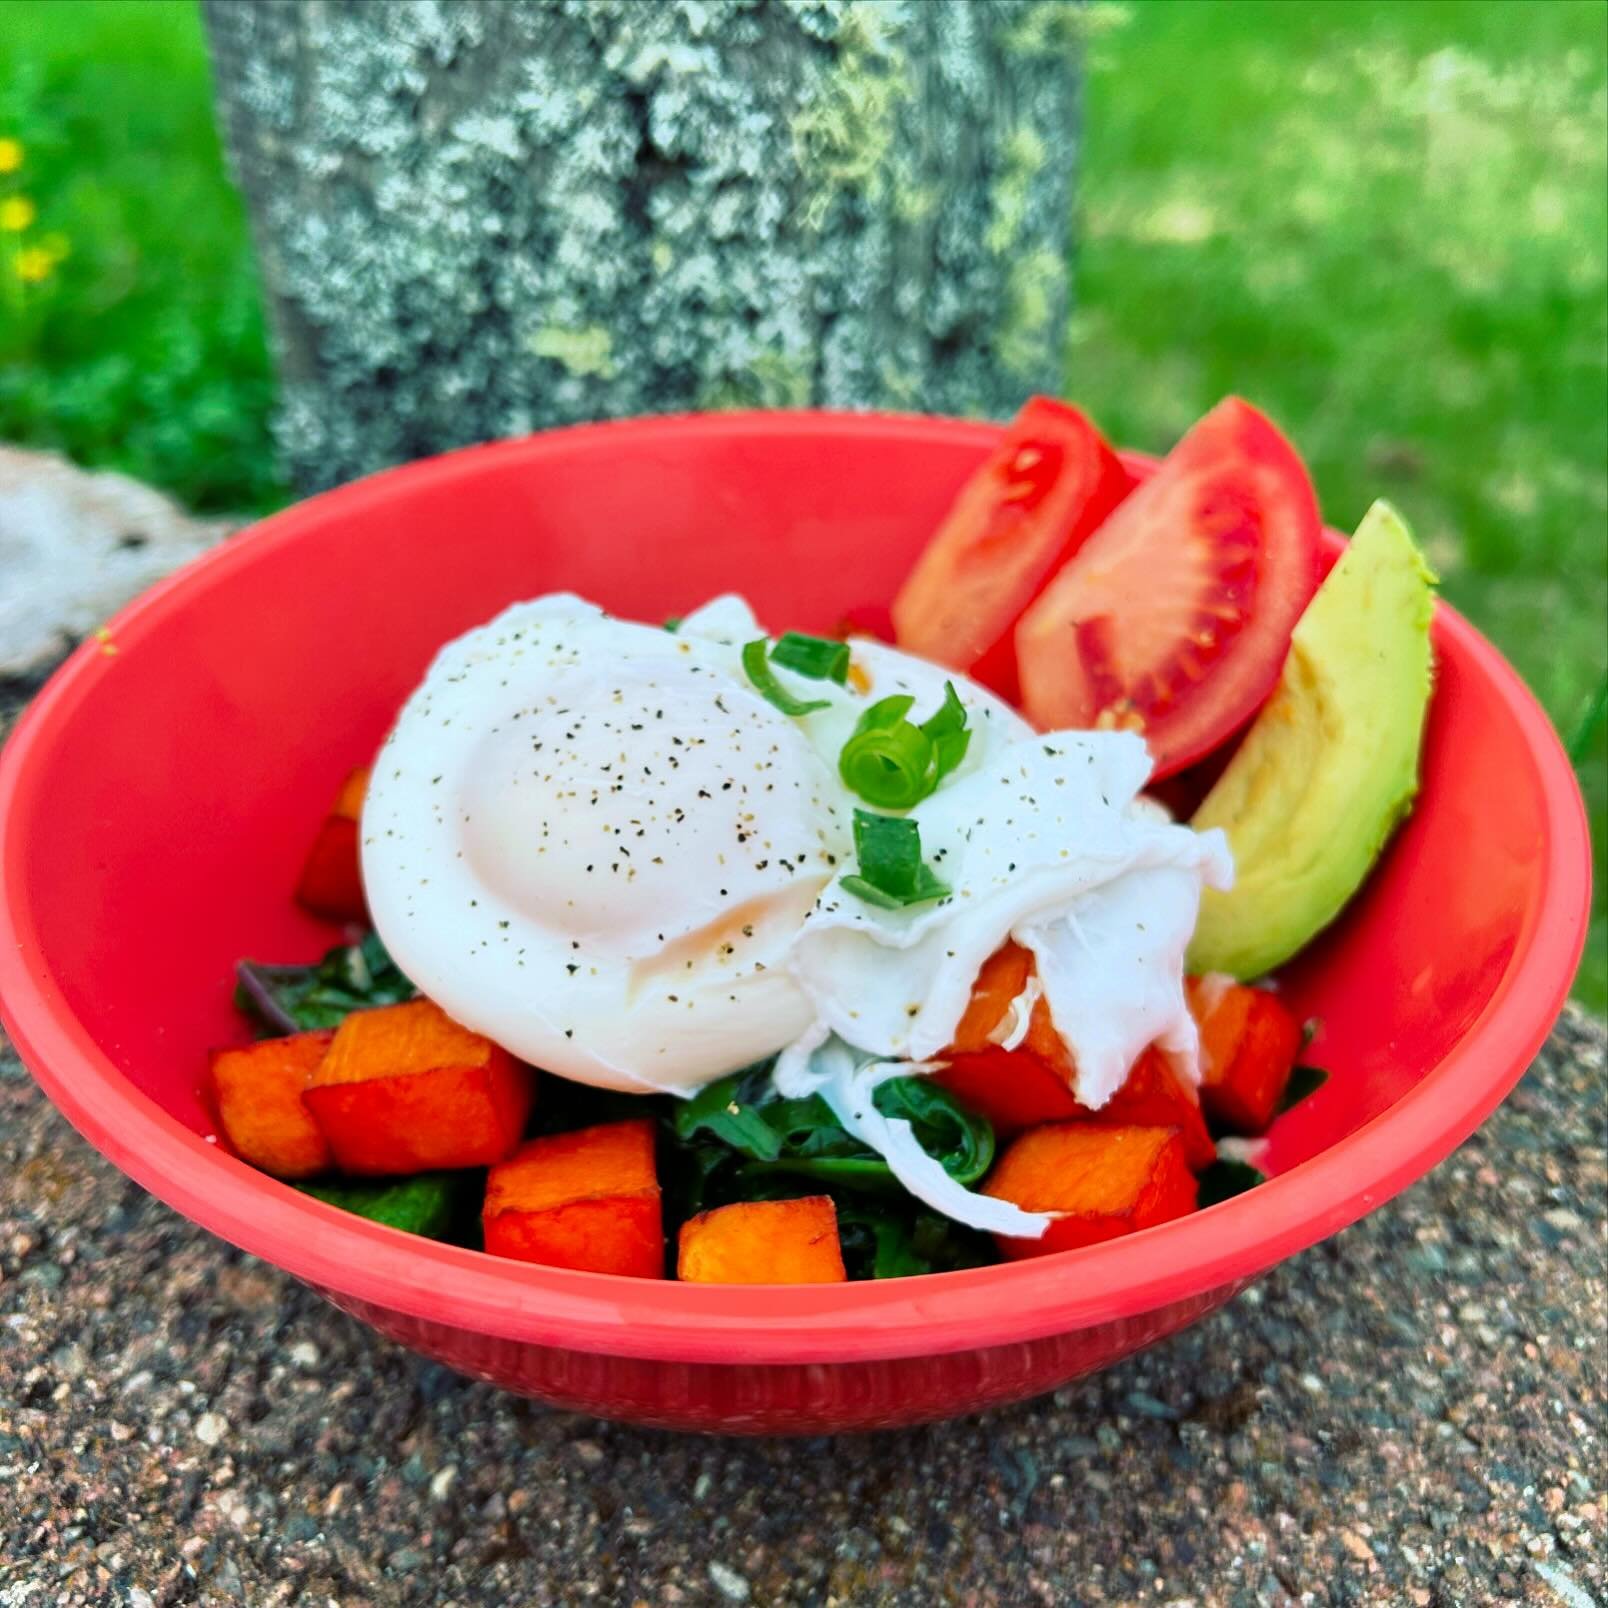 SATURDAY! We&rsquo;ve been waiting all winter for this&hellip; Our Farmer&rsquo;s Breakfast Bowl is now served w/ fresh, local greens from @rusticrootsfarm 🥬🥬🥬 Two poached, Franklin County-raised eggs, sweet potato home fries, @pinelandfarms sharp